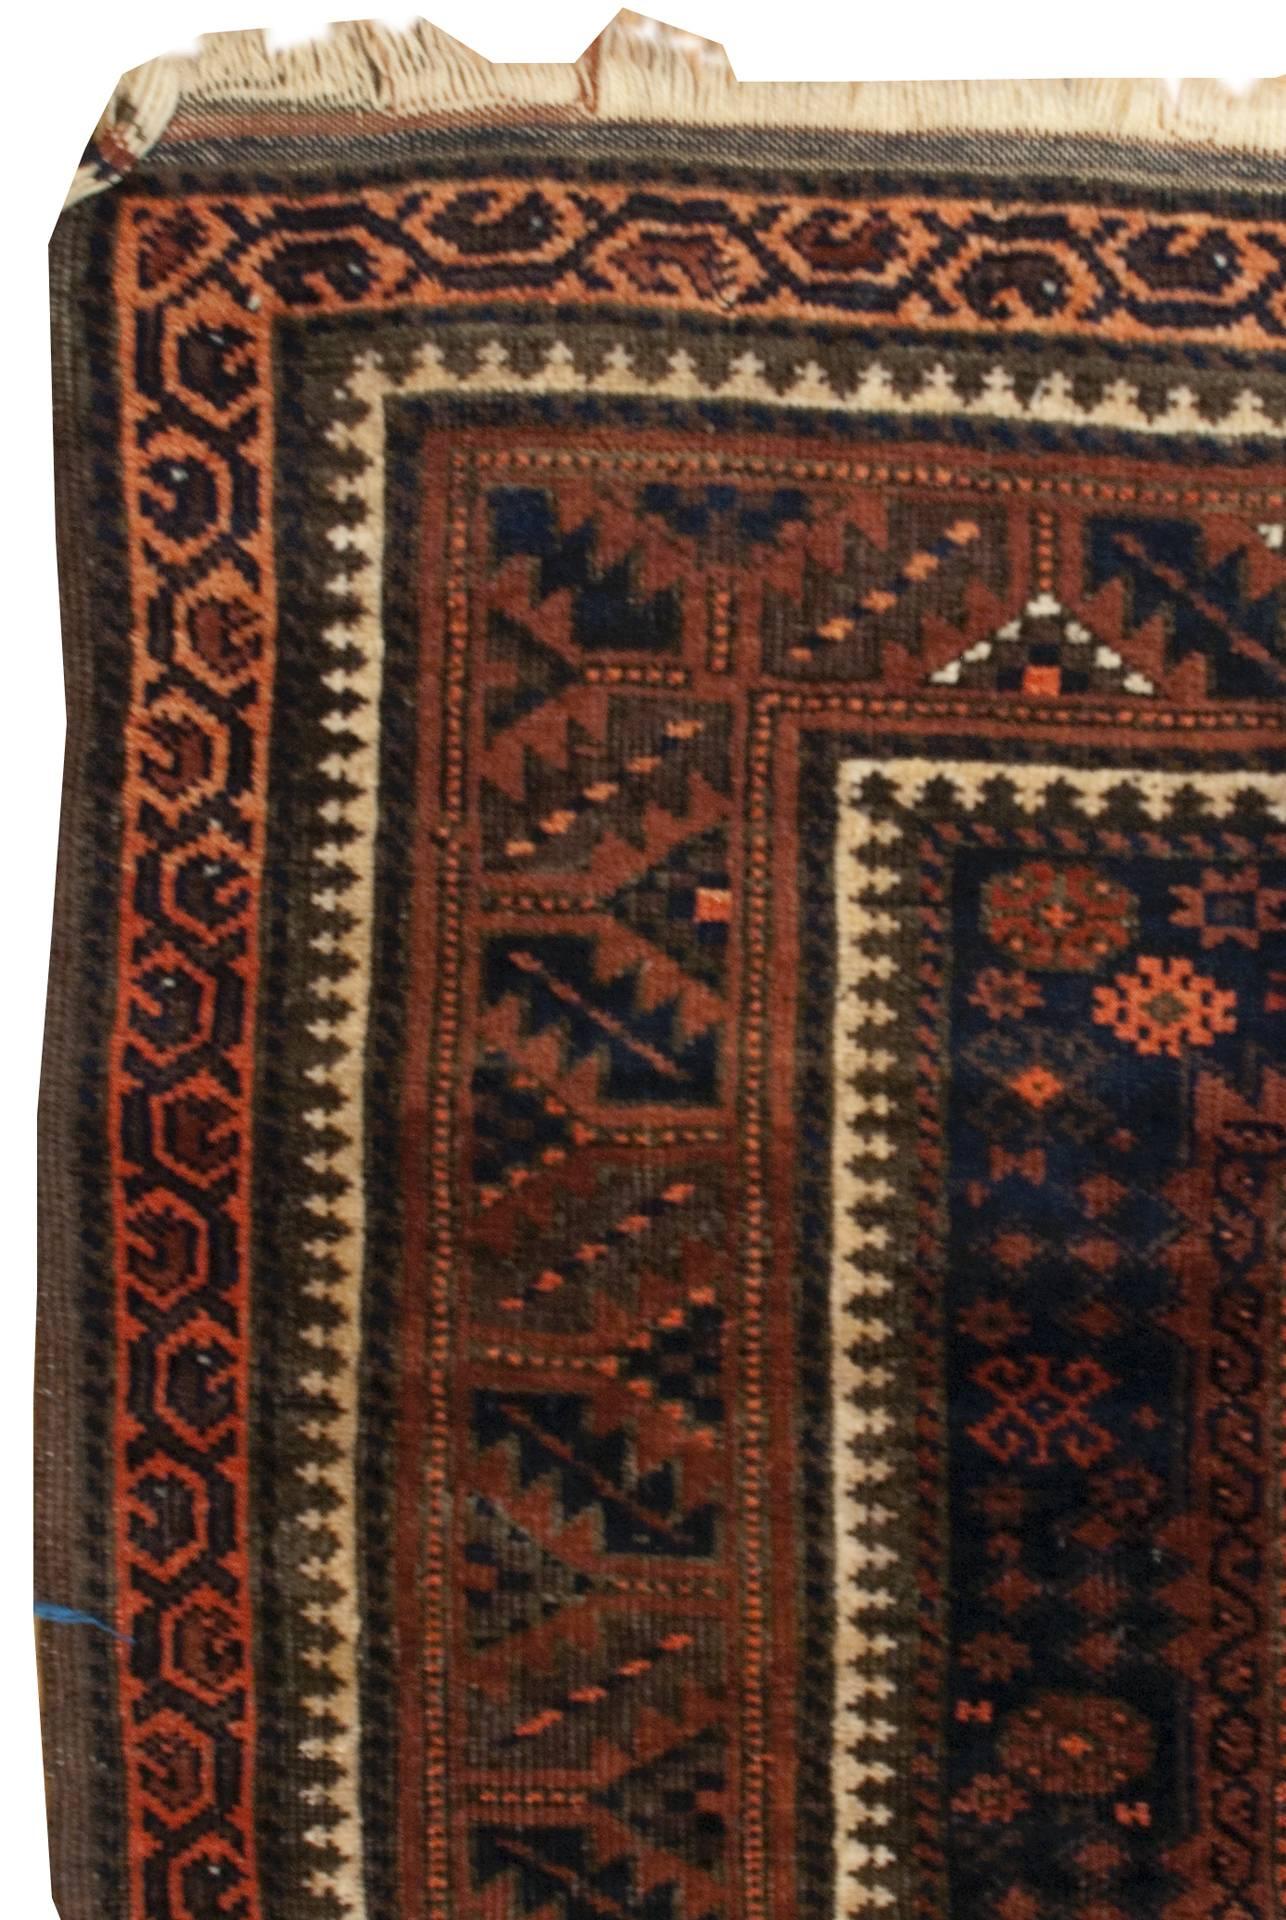 An early 20th century Persian Baluch rug with eight rectangular medallions on an indigo background amidst a field of flowers, and surrounded by multiple complementary geometric and floral borders.